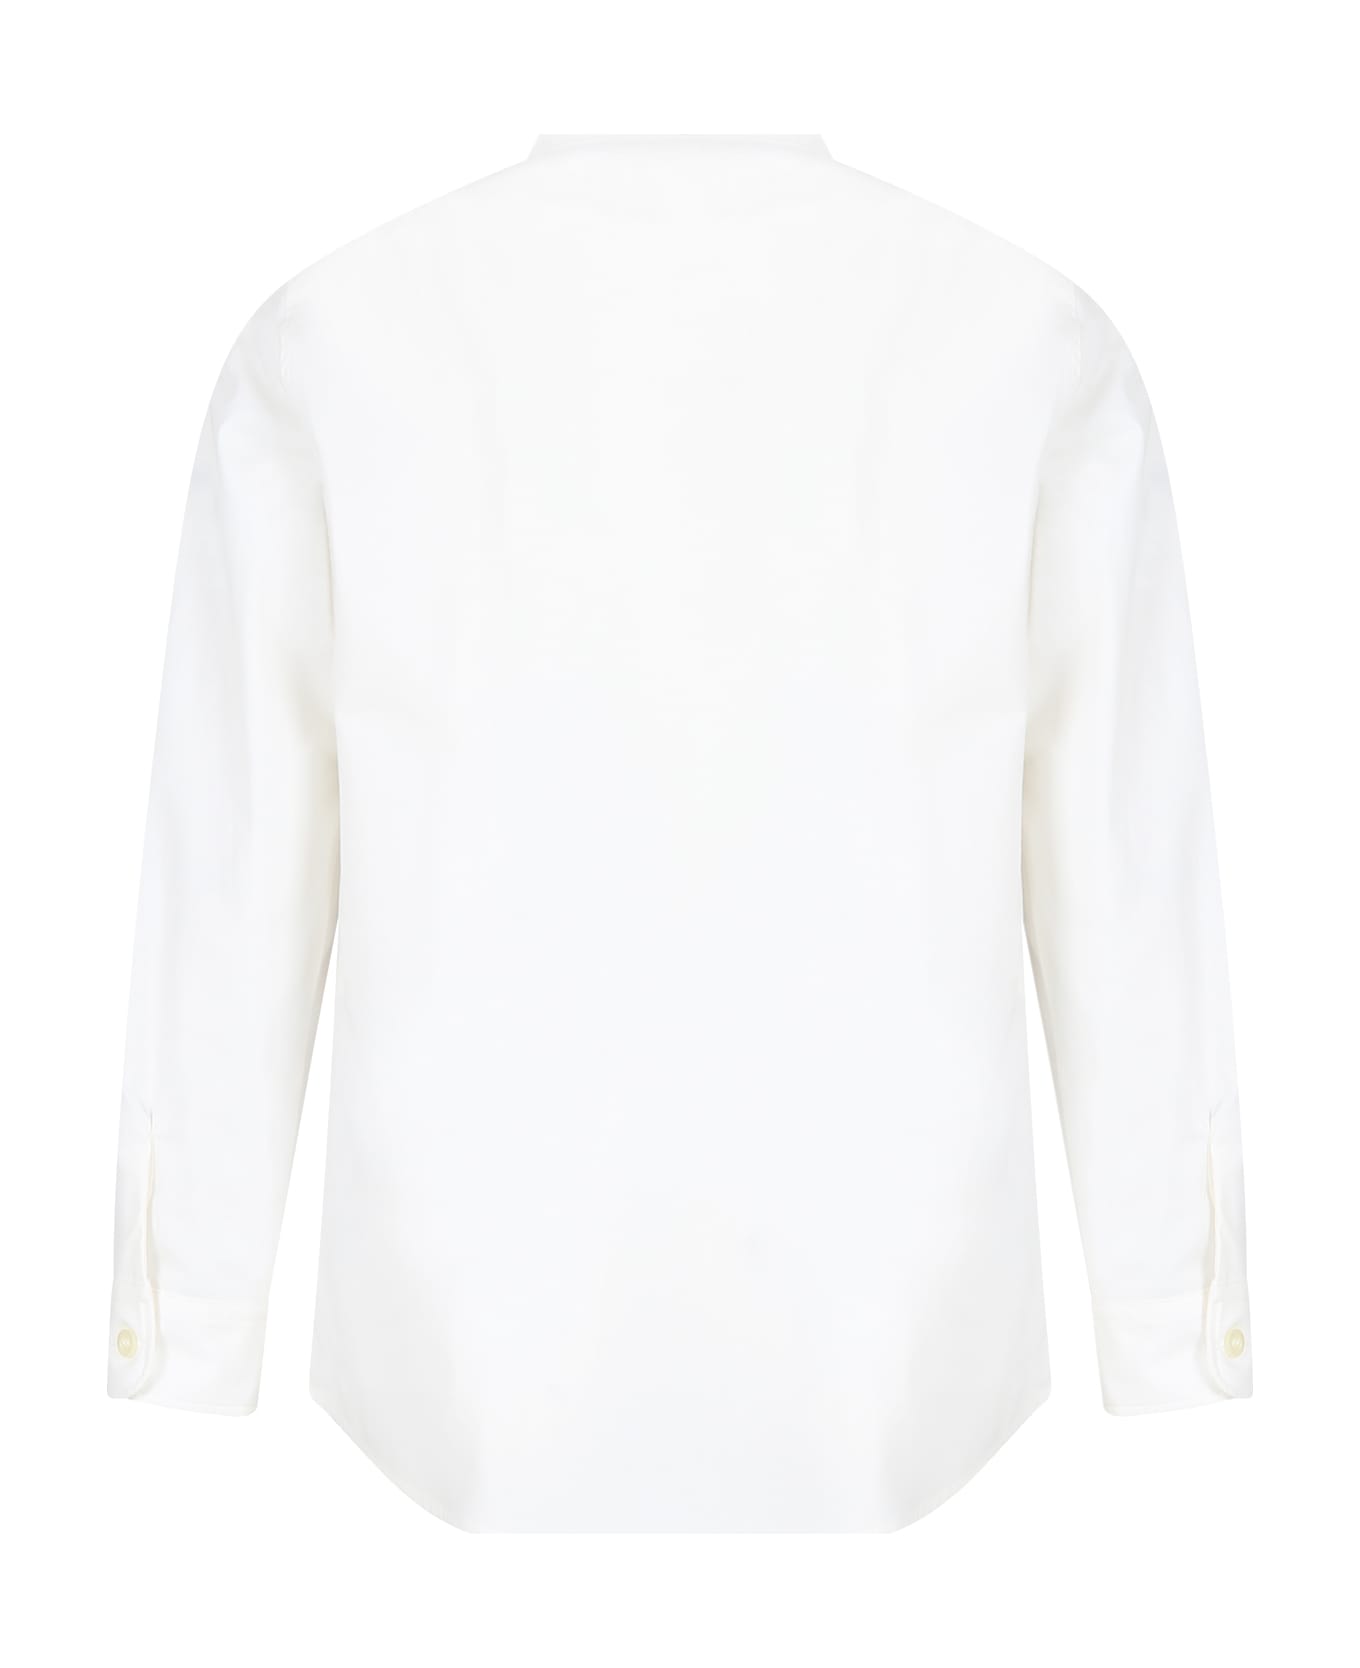 Gucci White Shirt For Boy With Gg Cross - White